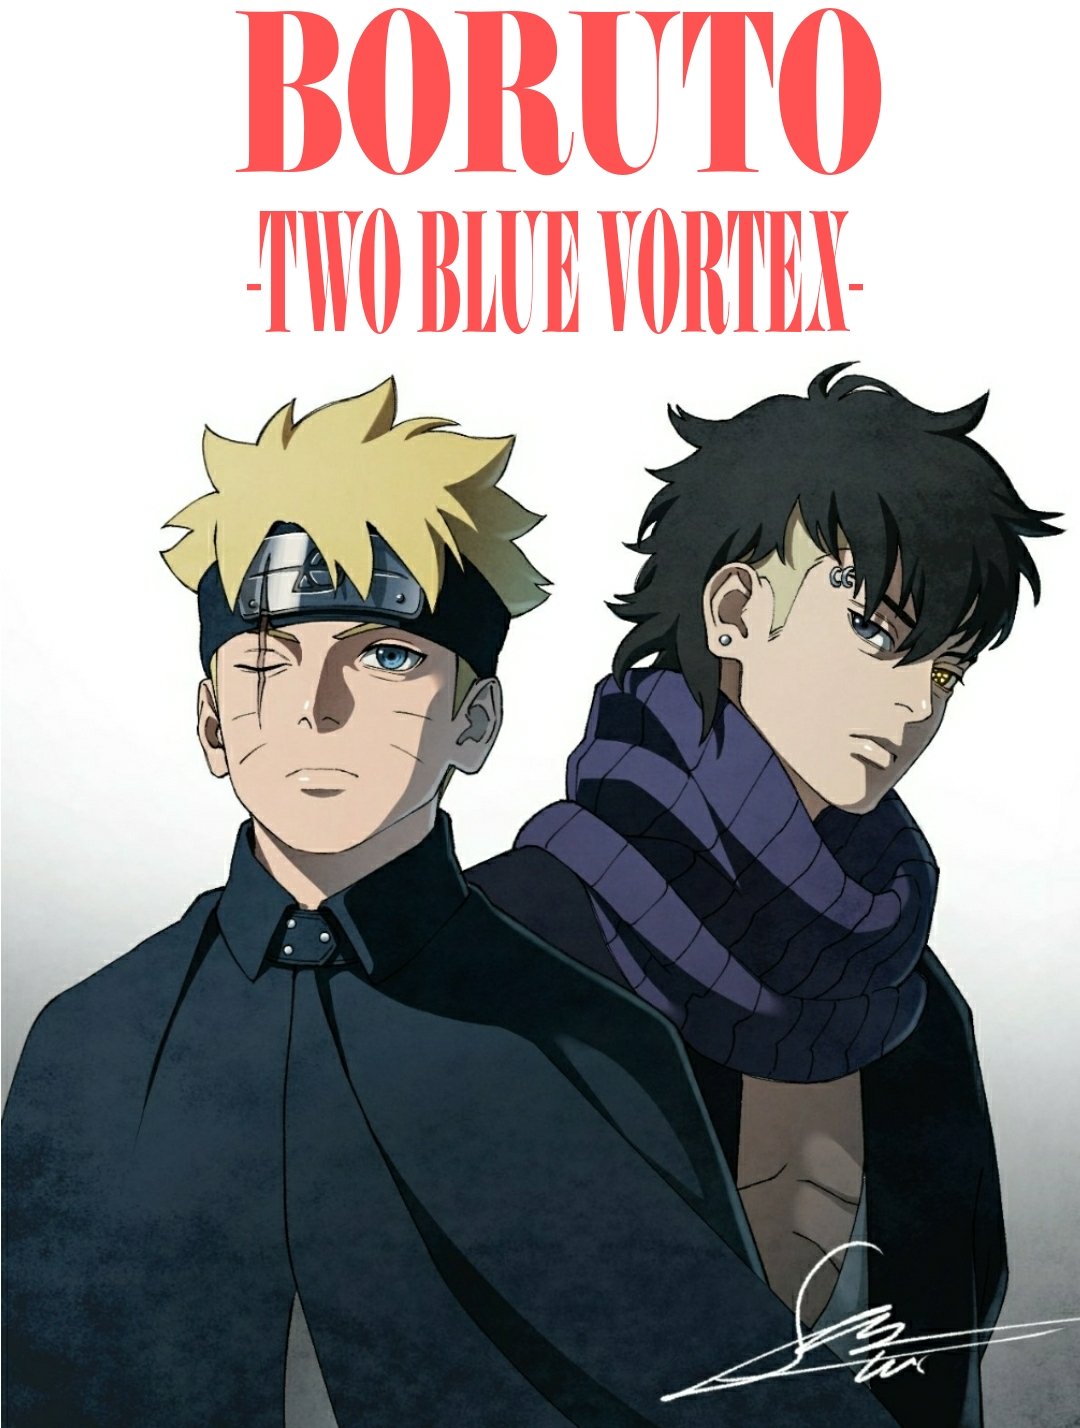 Boruto Two Blue Vortex Anime Release Date: The Countdown Begins